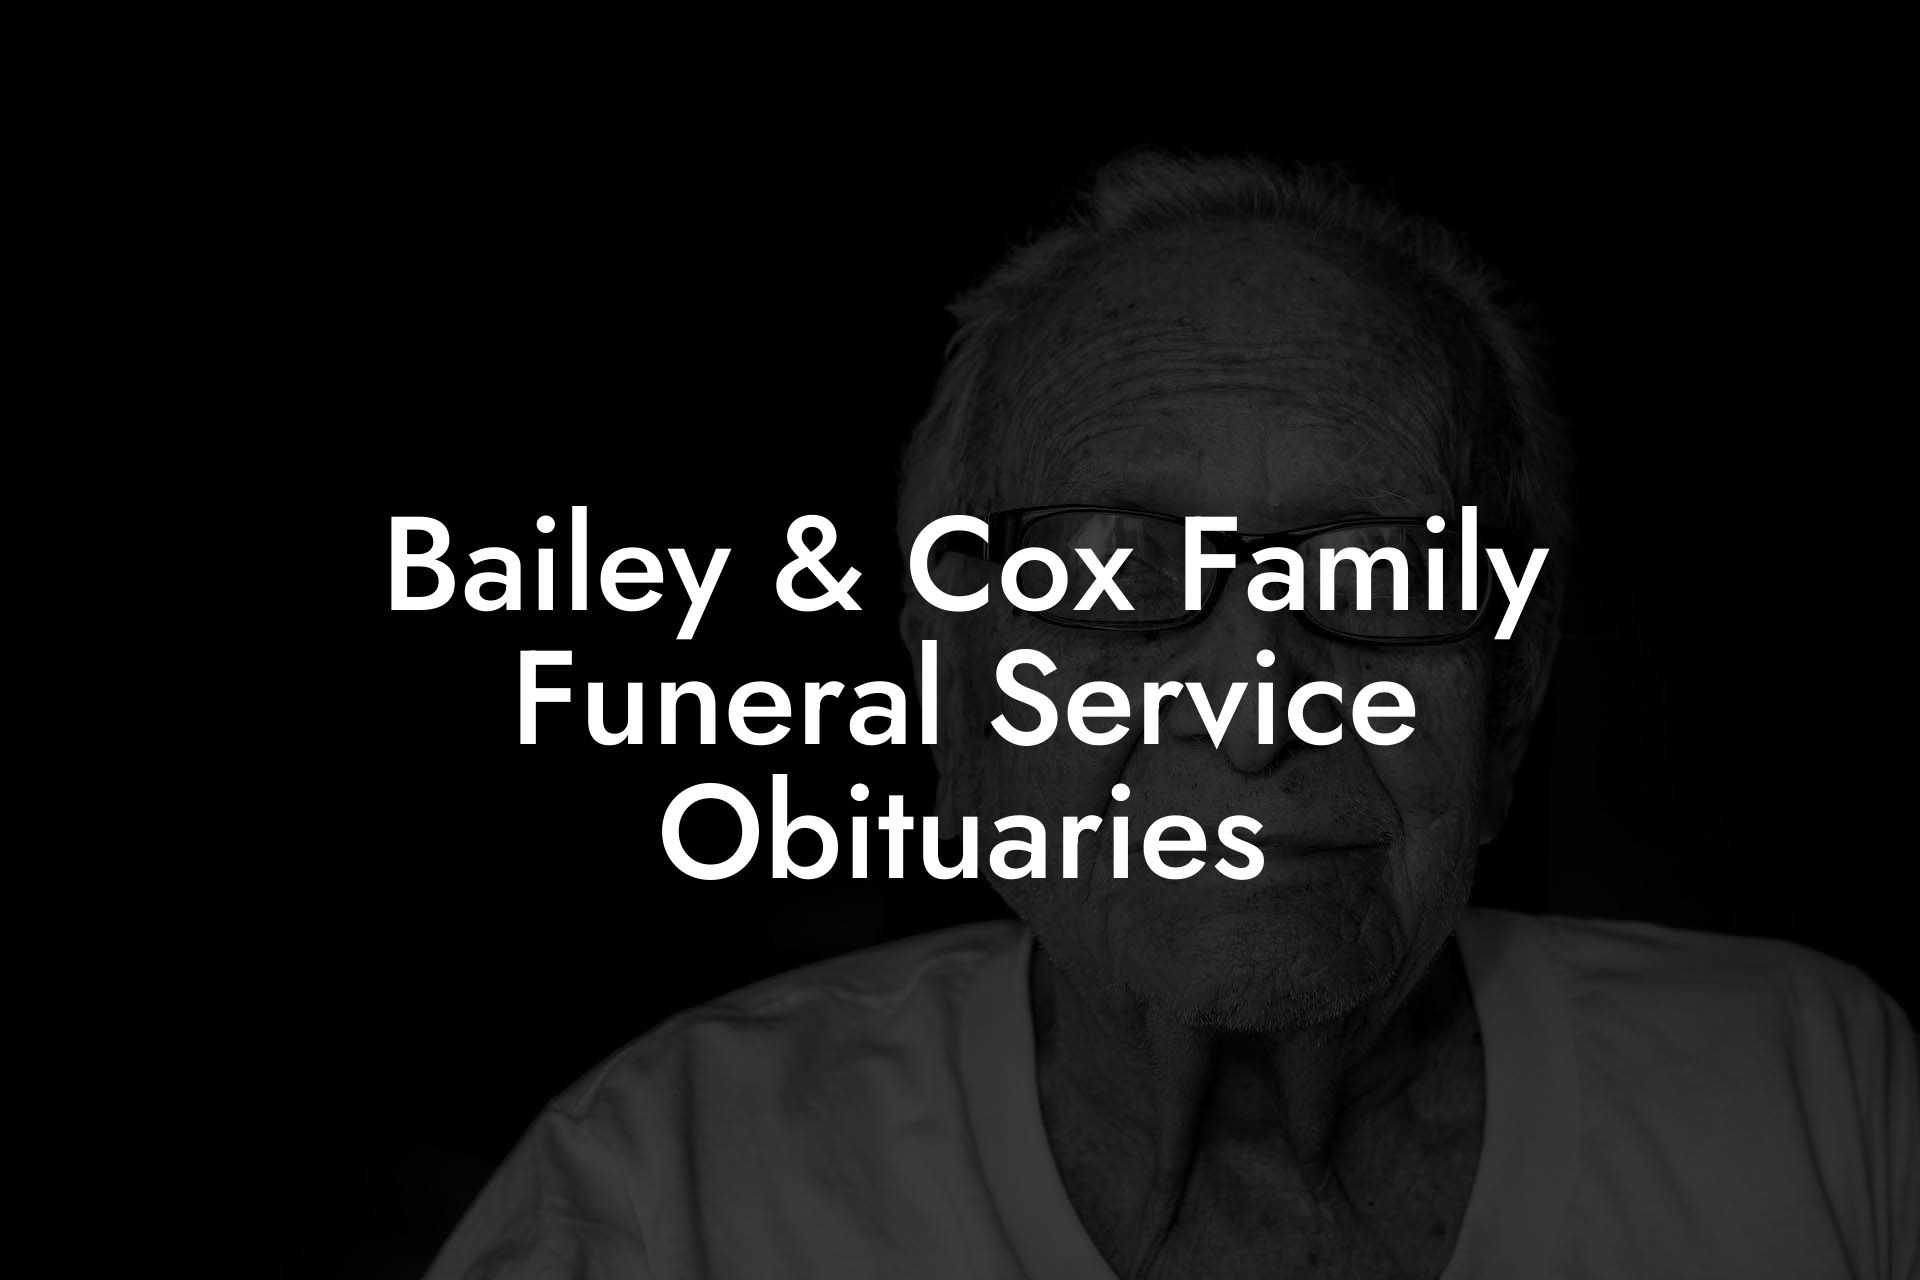 Bailey & Cox Family Funeral Service Obituaries